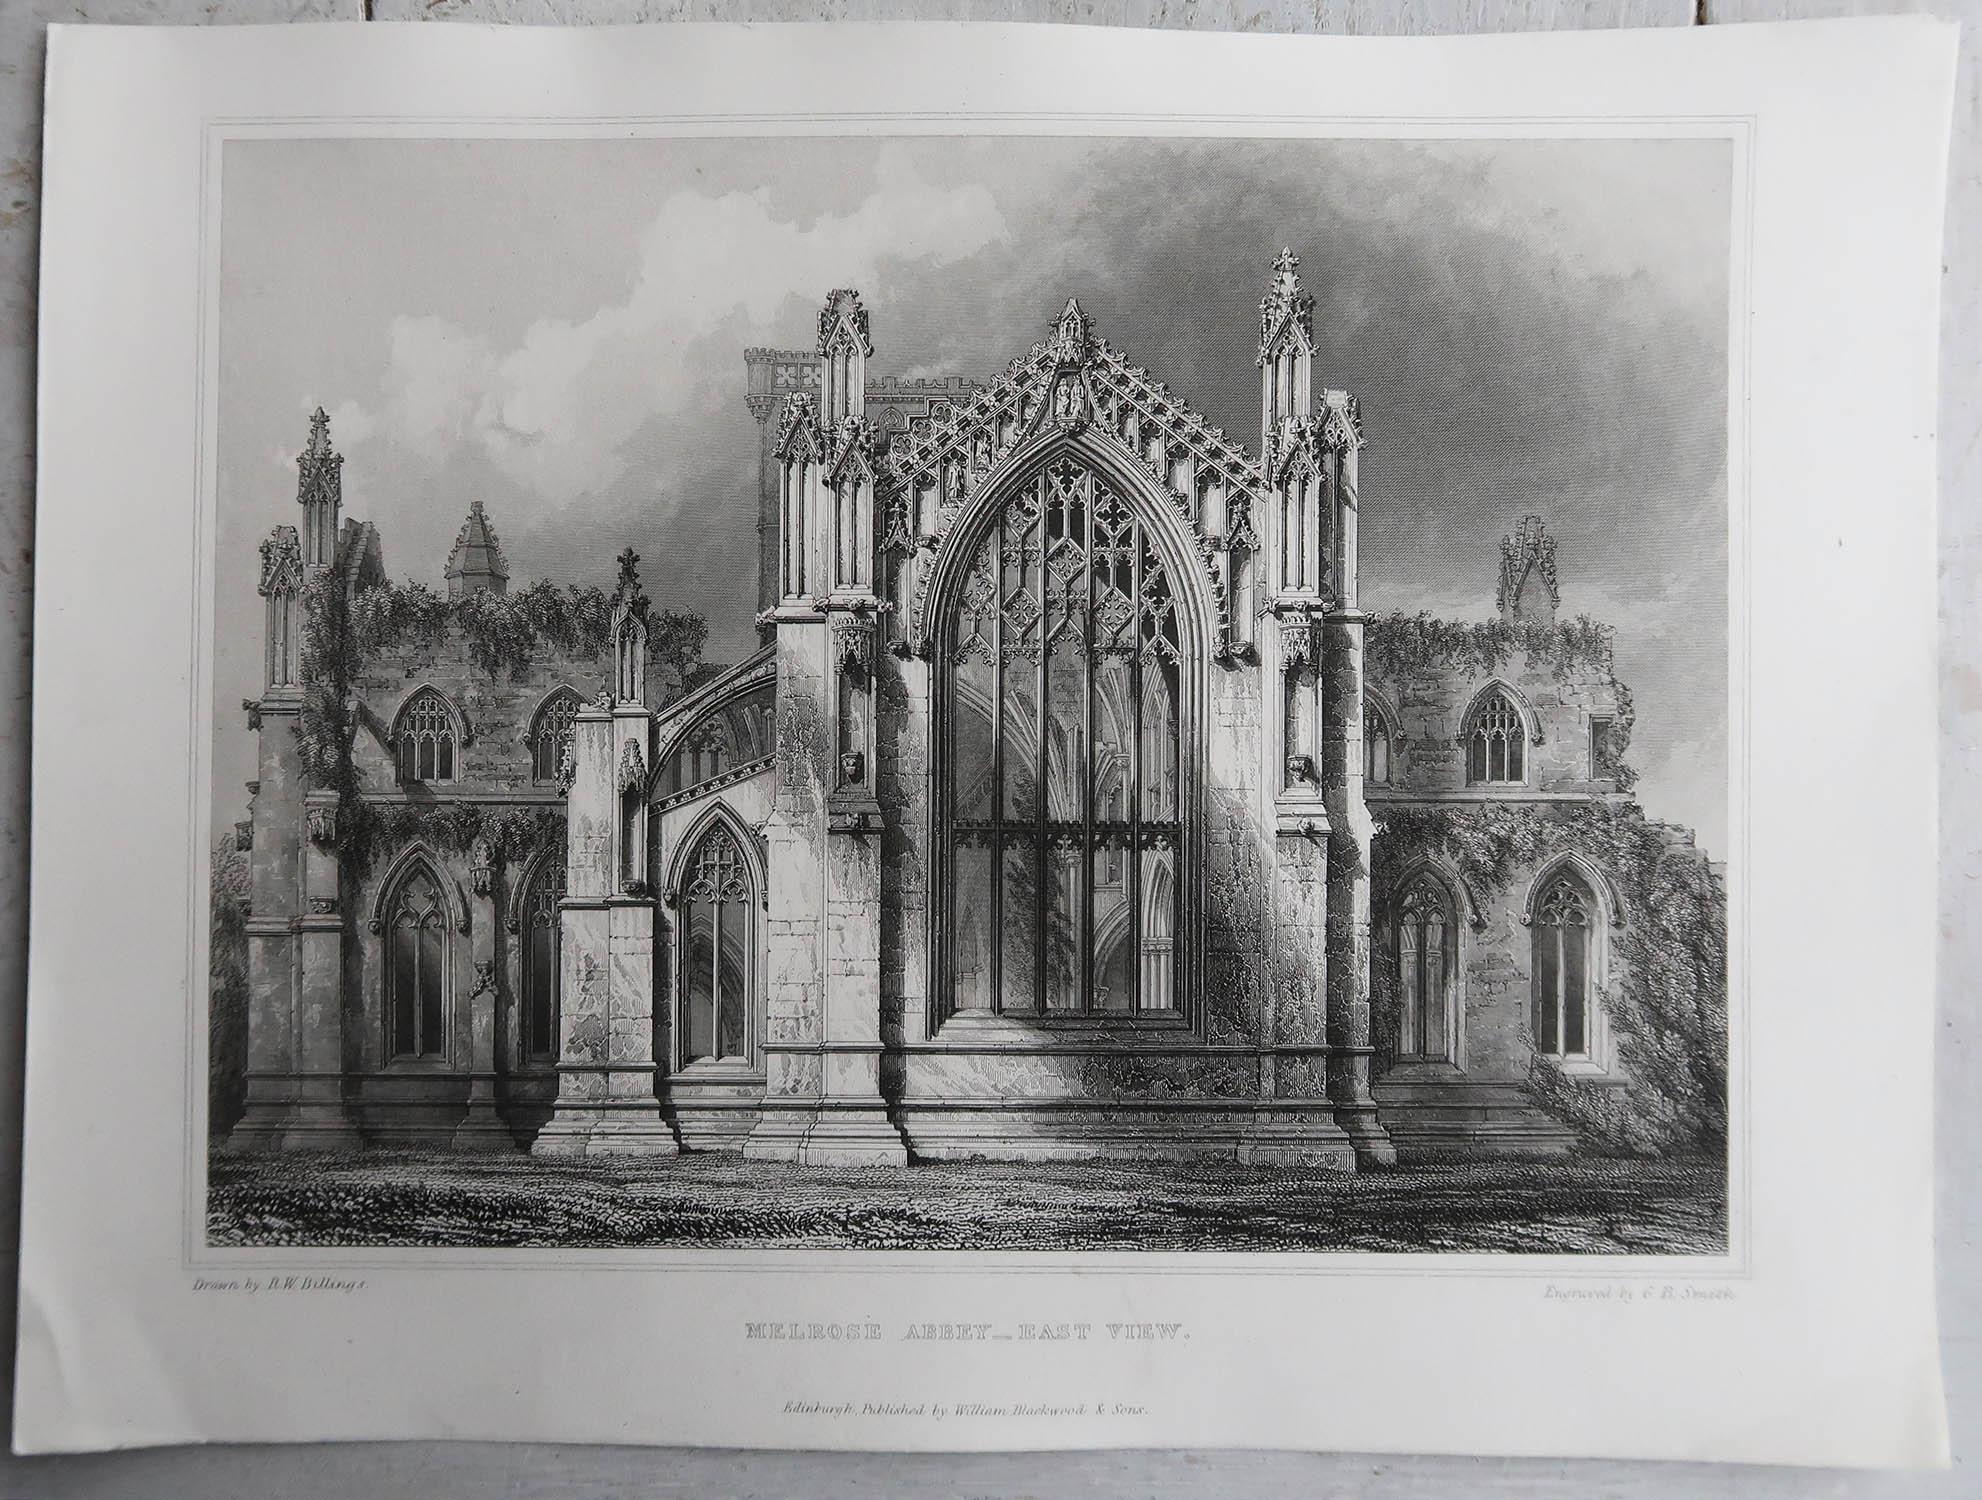 Gothic Revival Set of 18 Gothic Architectural Prints ( Scotland ) After Robert Billings. 1848 For Sale